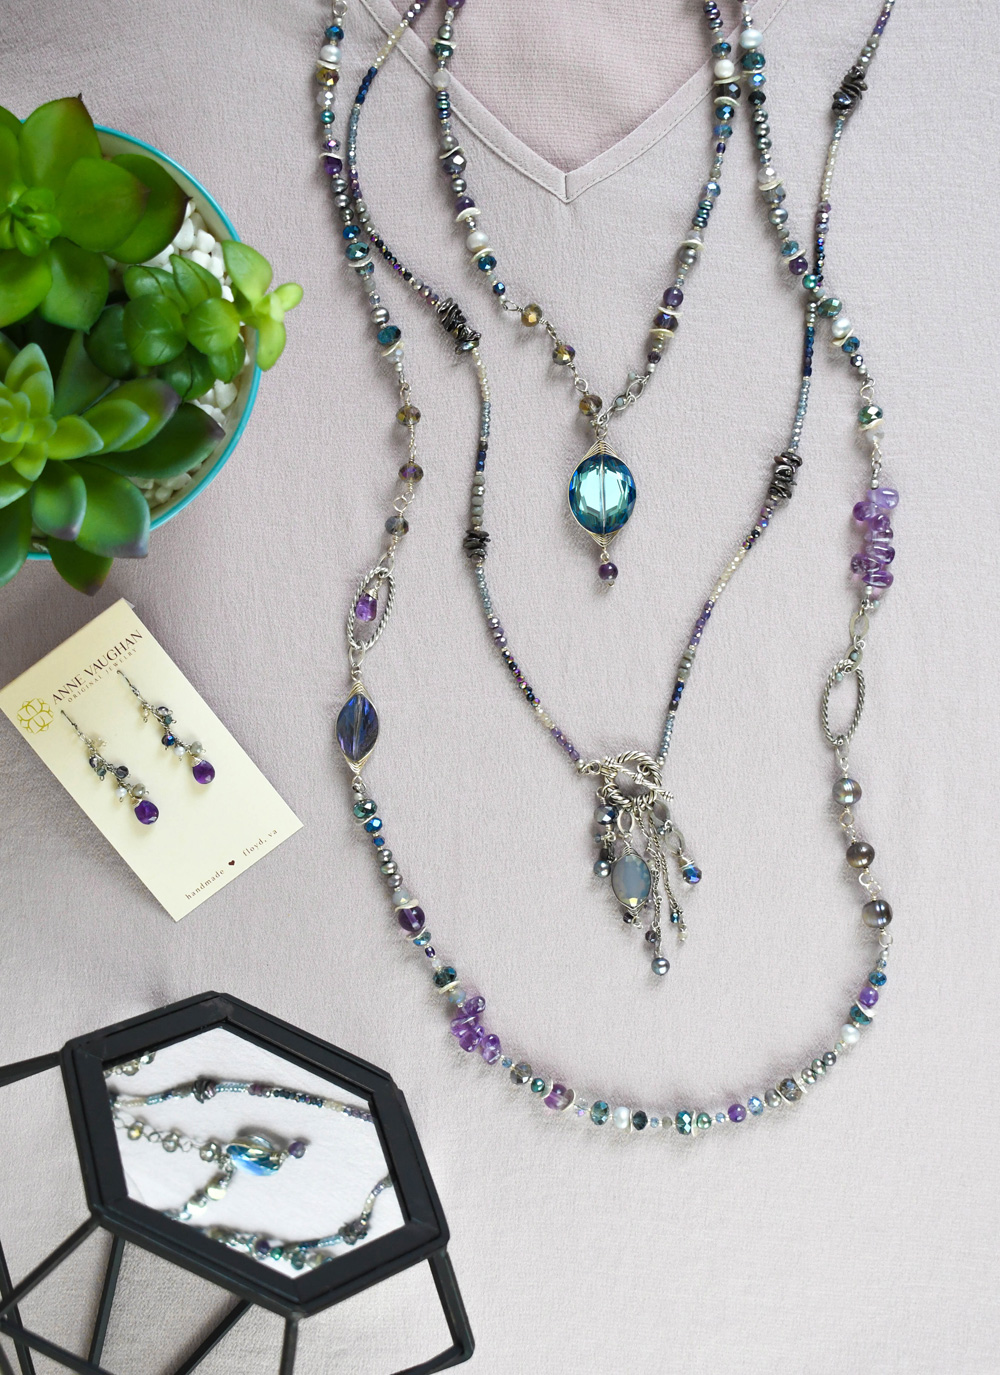 Anne Vaughan mix and match necklaces